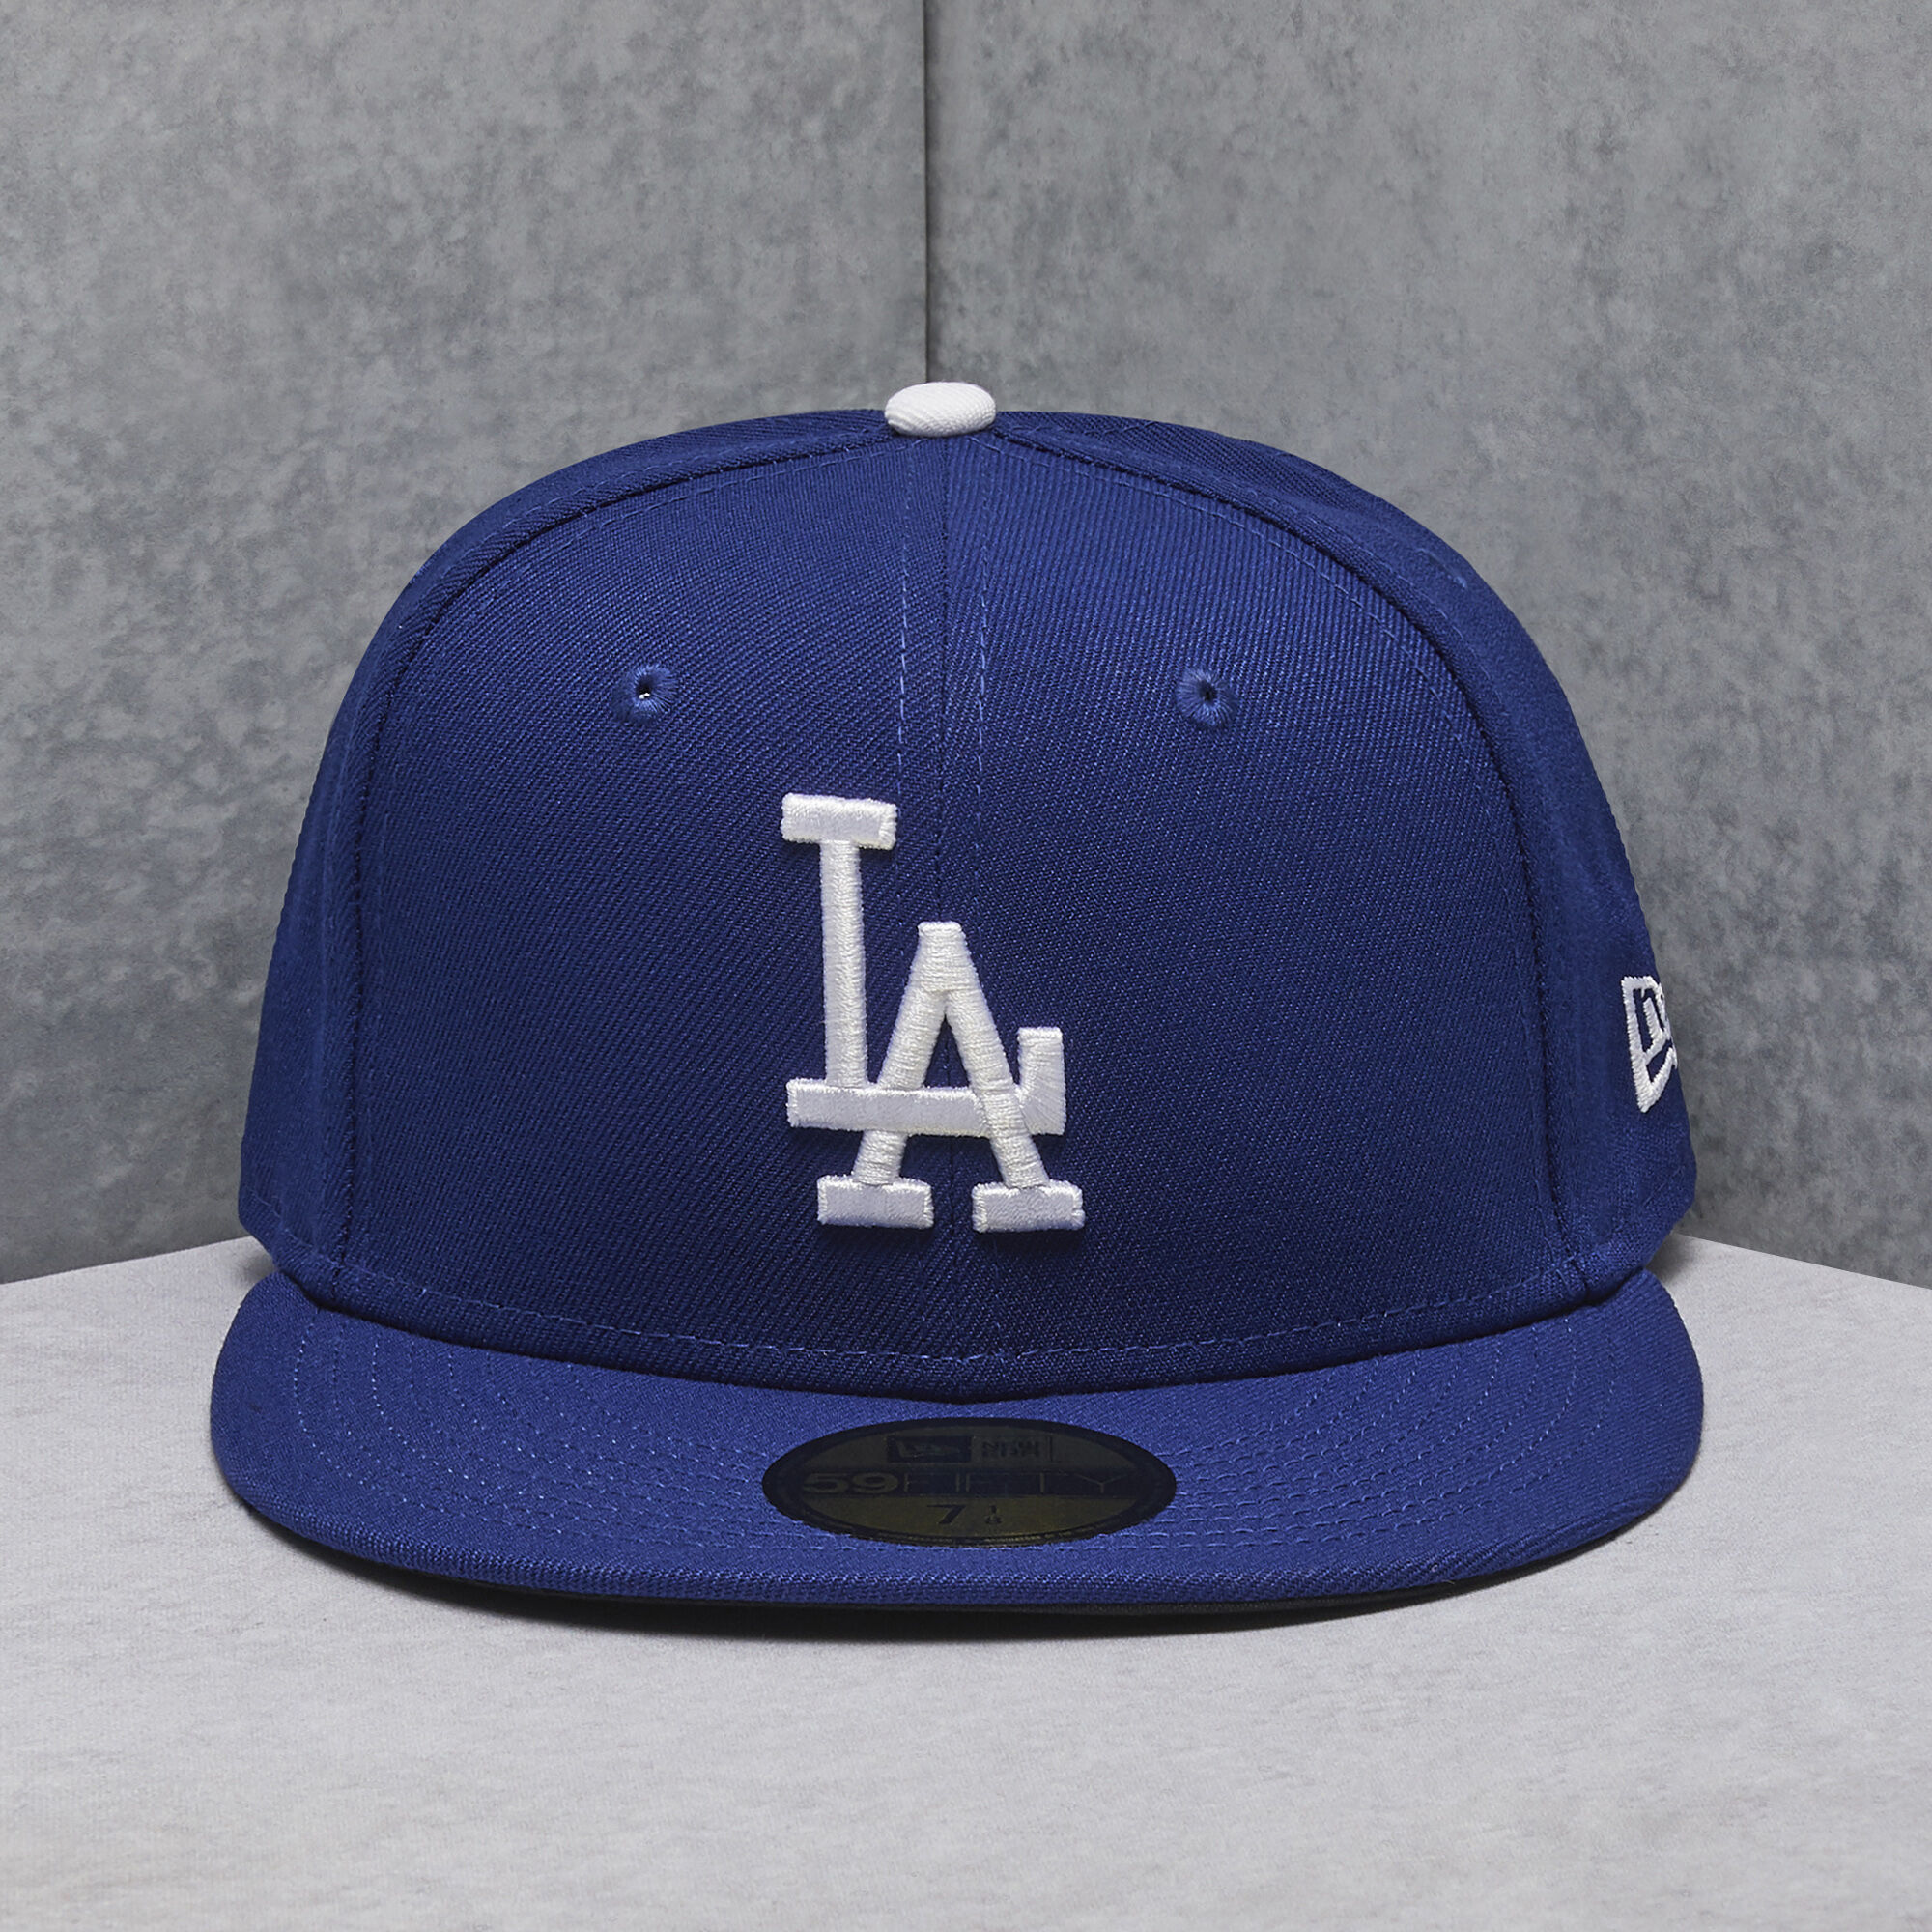 New Era LA DODGERS AUTHENTIC ON FIELD GAME 59FIFTY CAP Blue - LIGHT  ROYAL/BRIGHT ROYAL